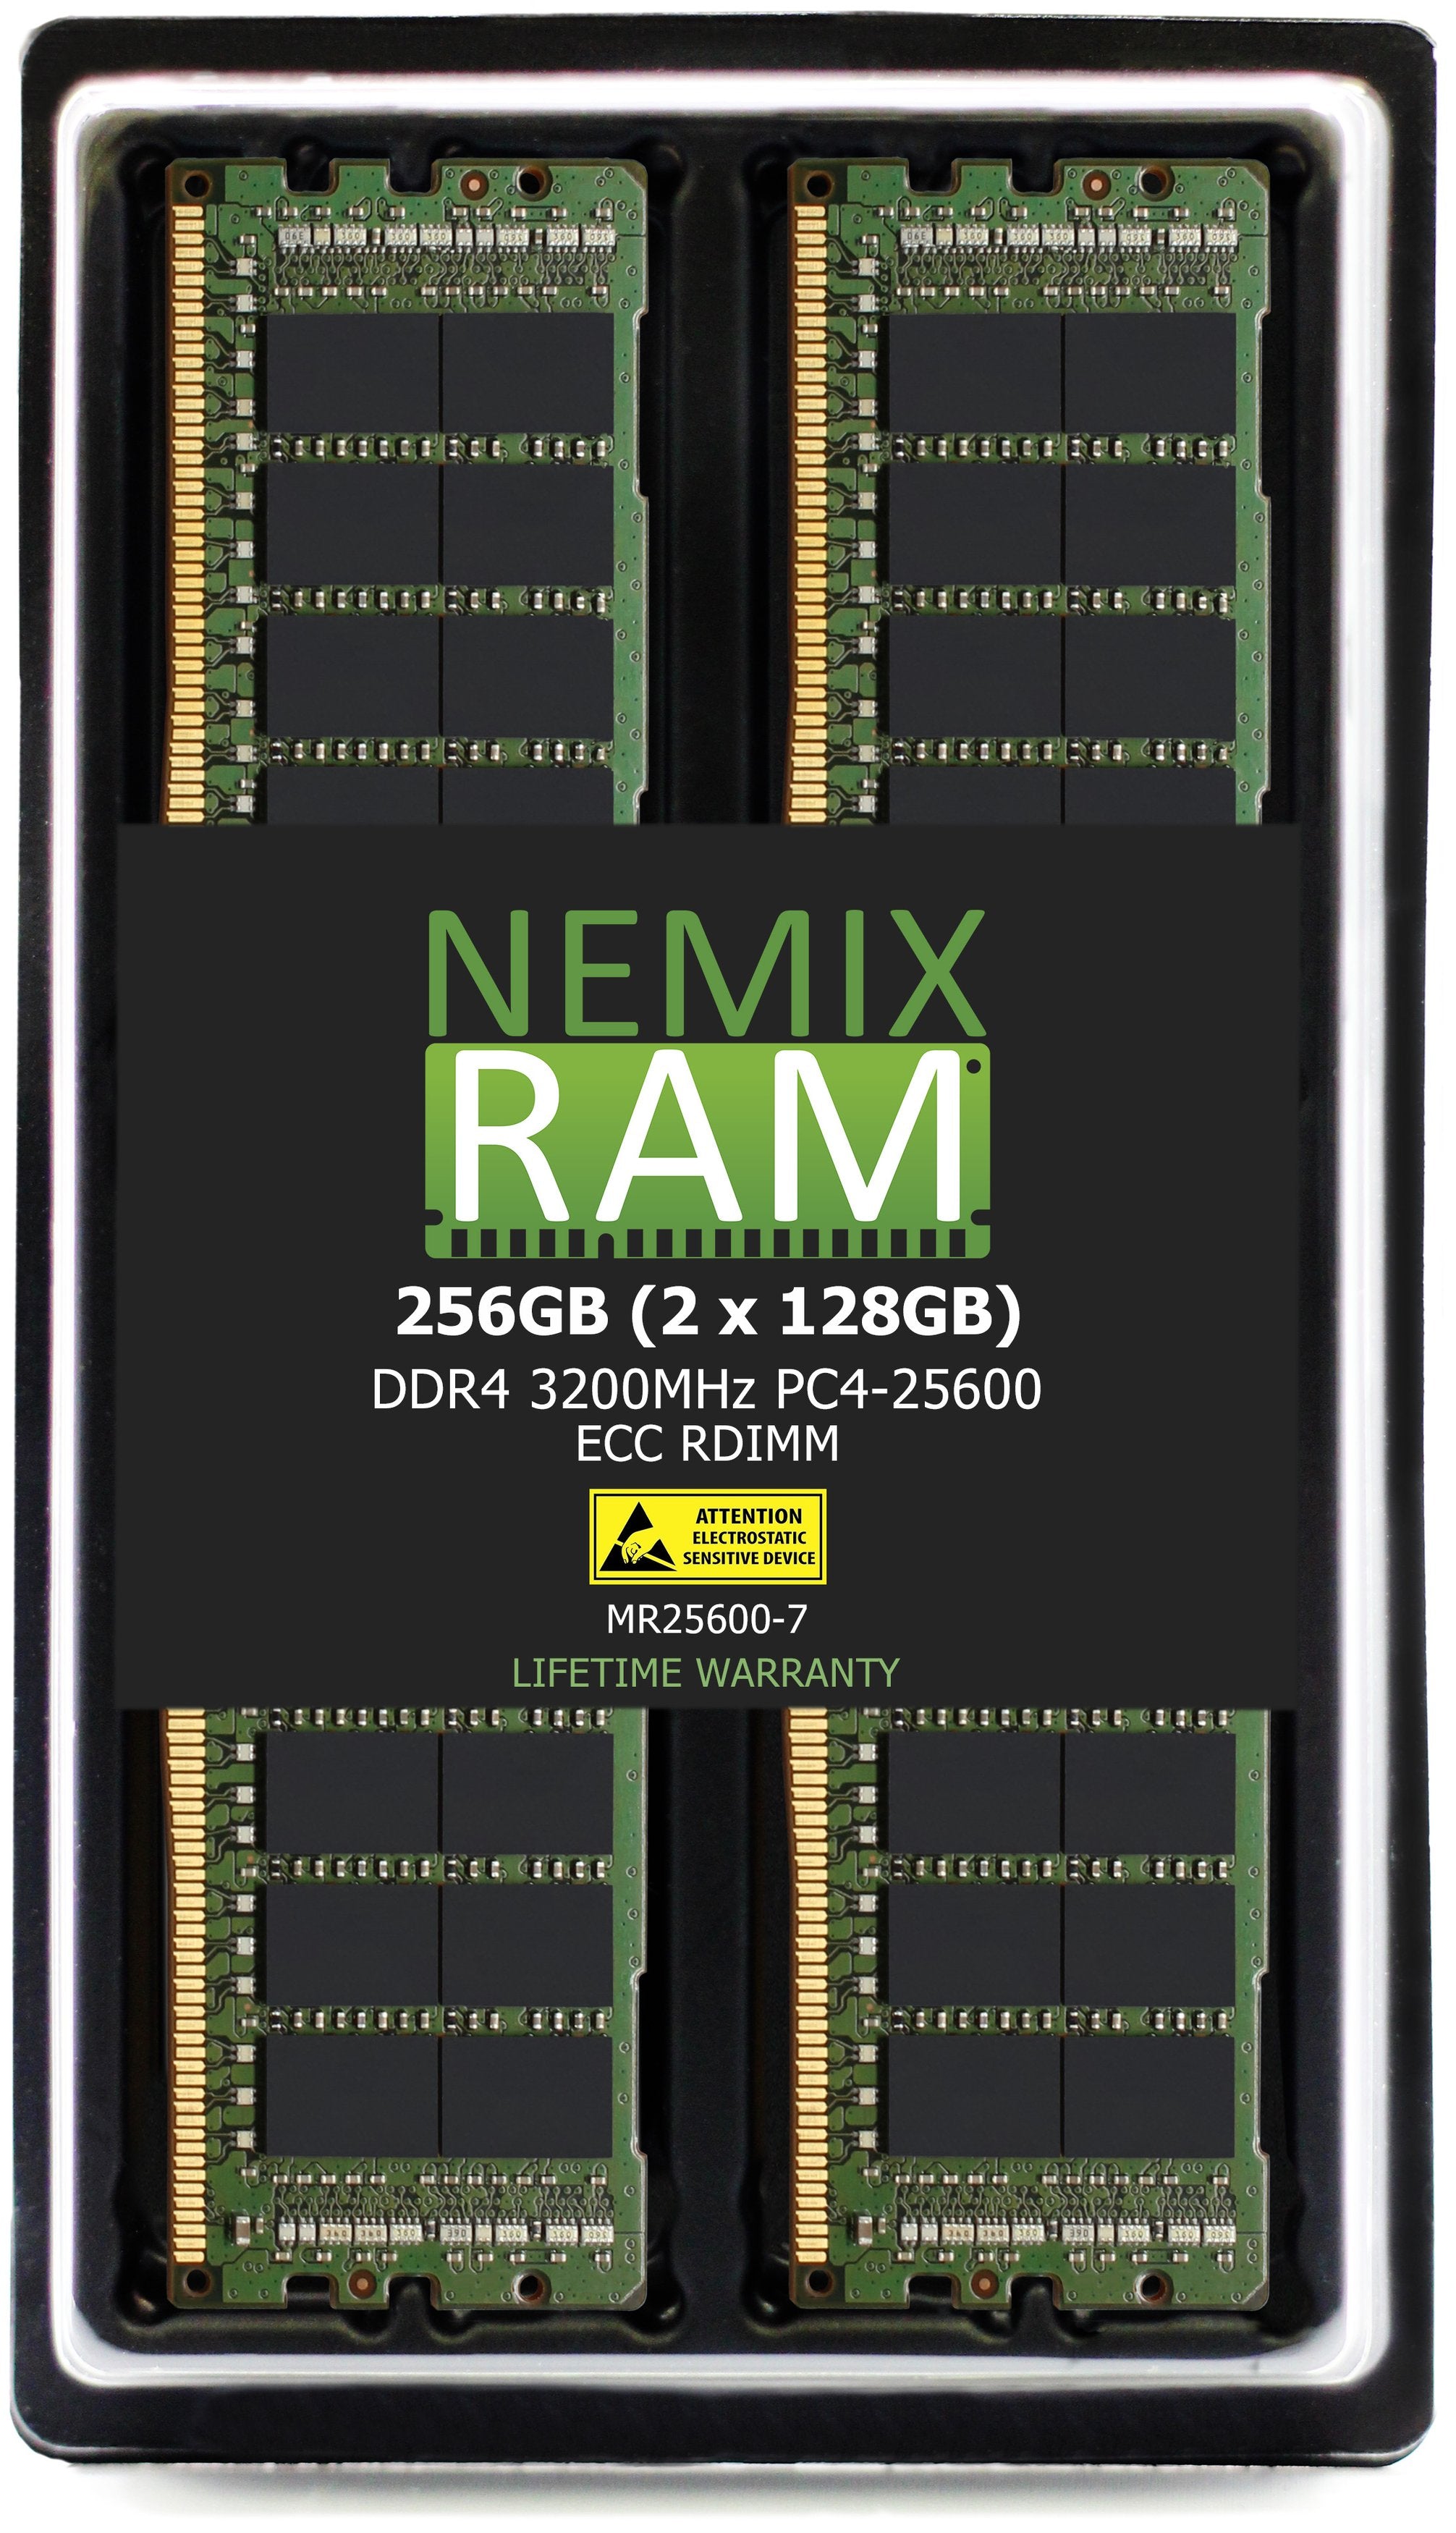 DDR4 3200MHZ PC4-25600 RDIMM 2S2RX4